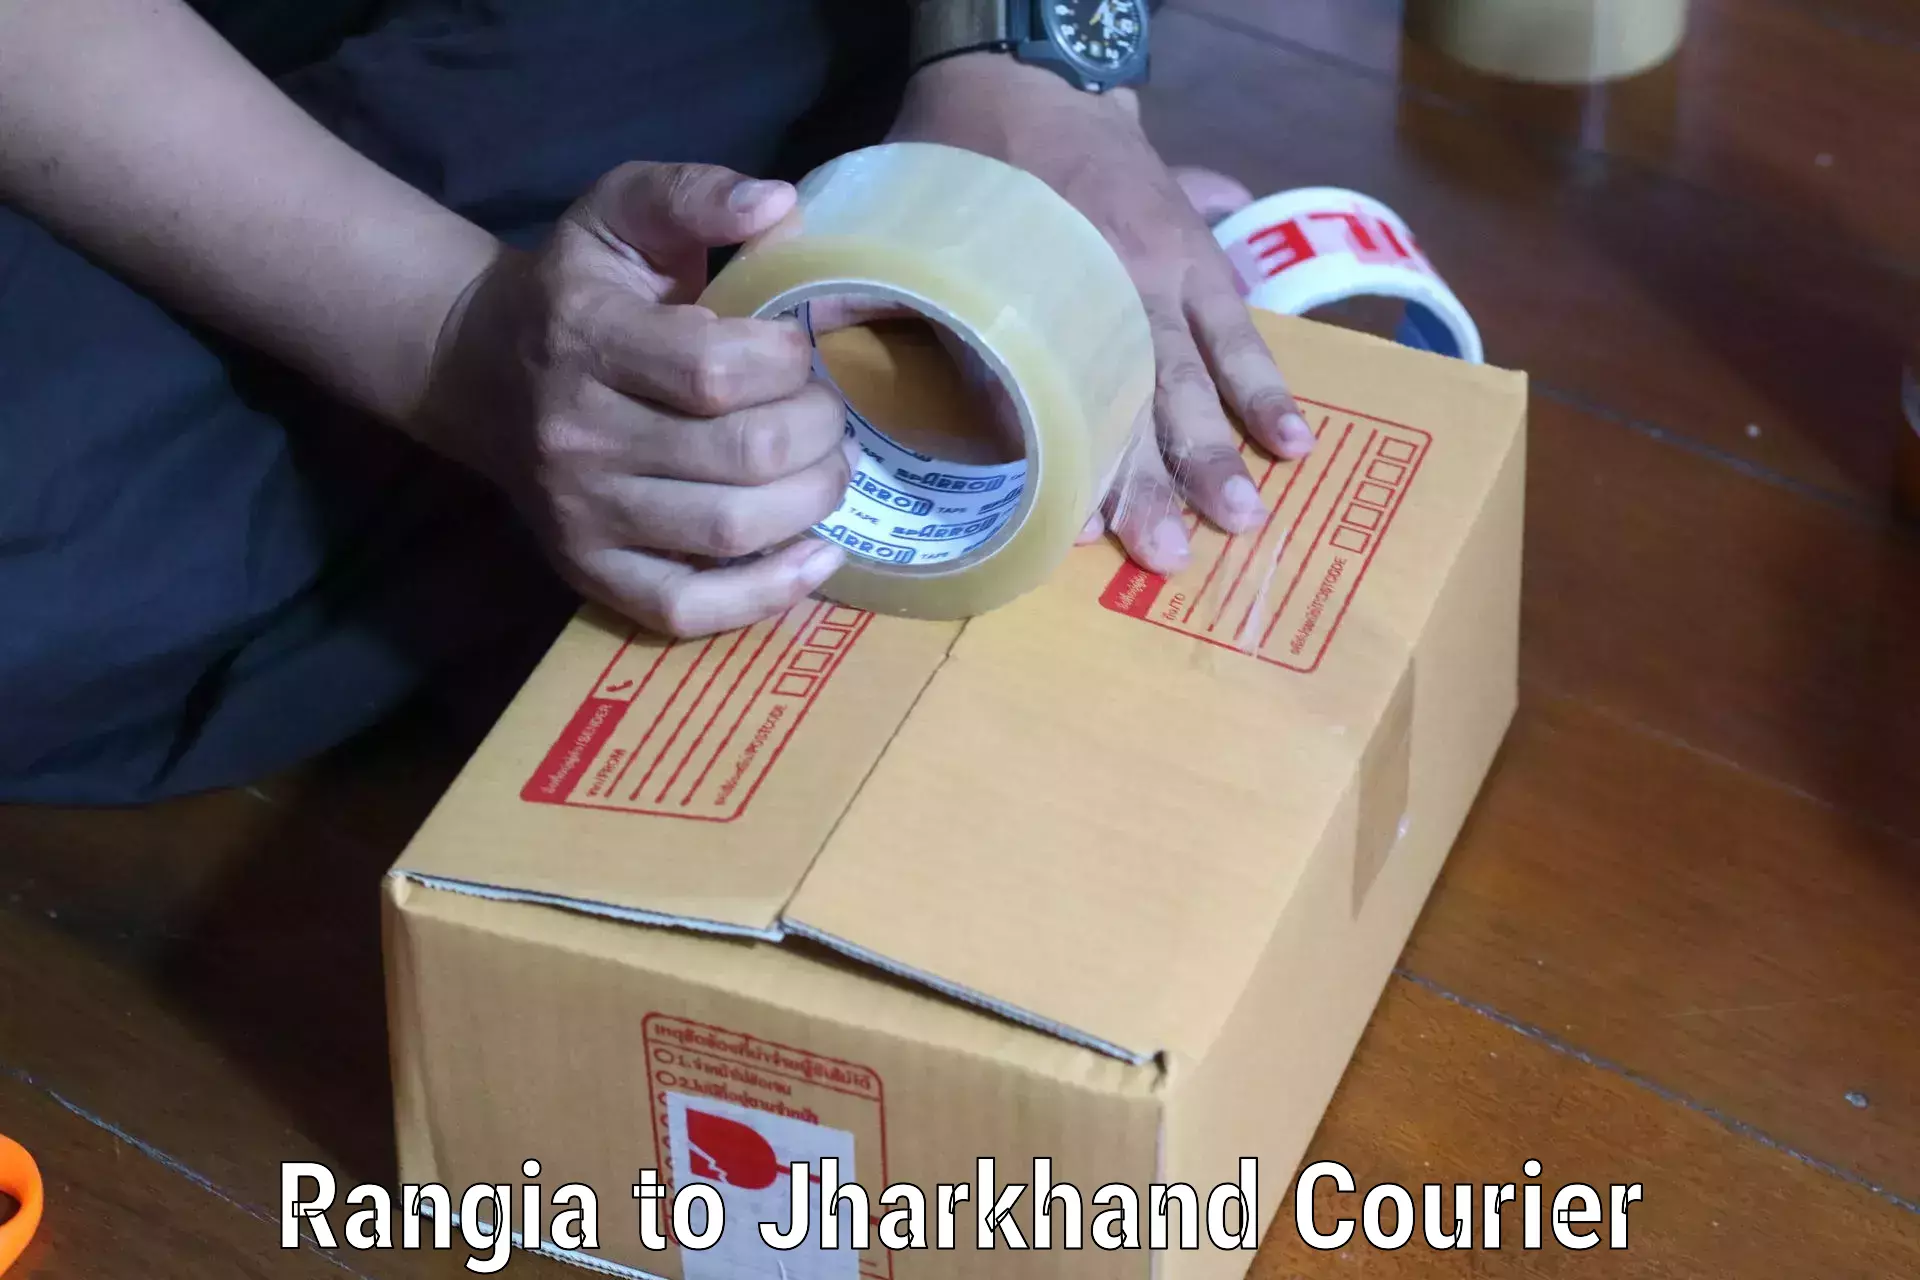 Bulk courier orders in Rangia to Birla Institute of Technology Ranchi